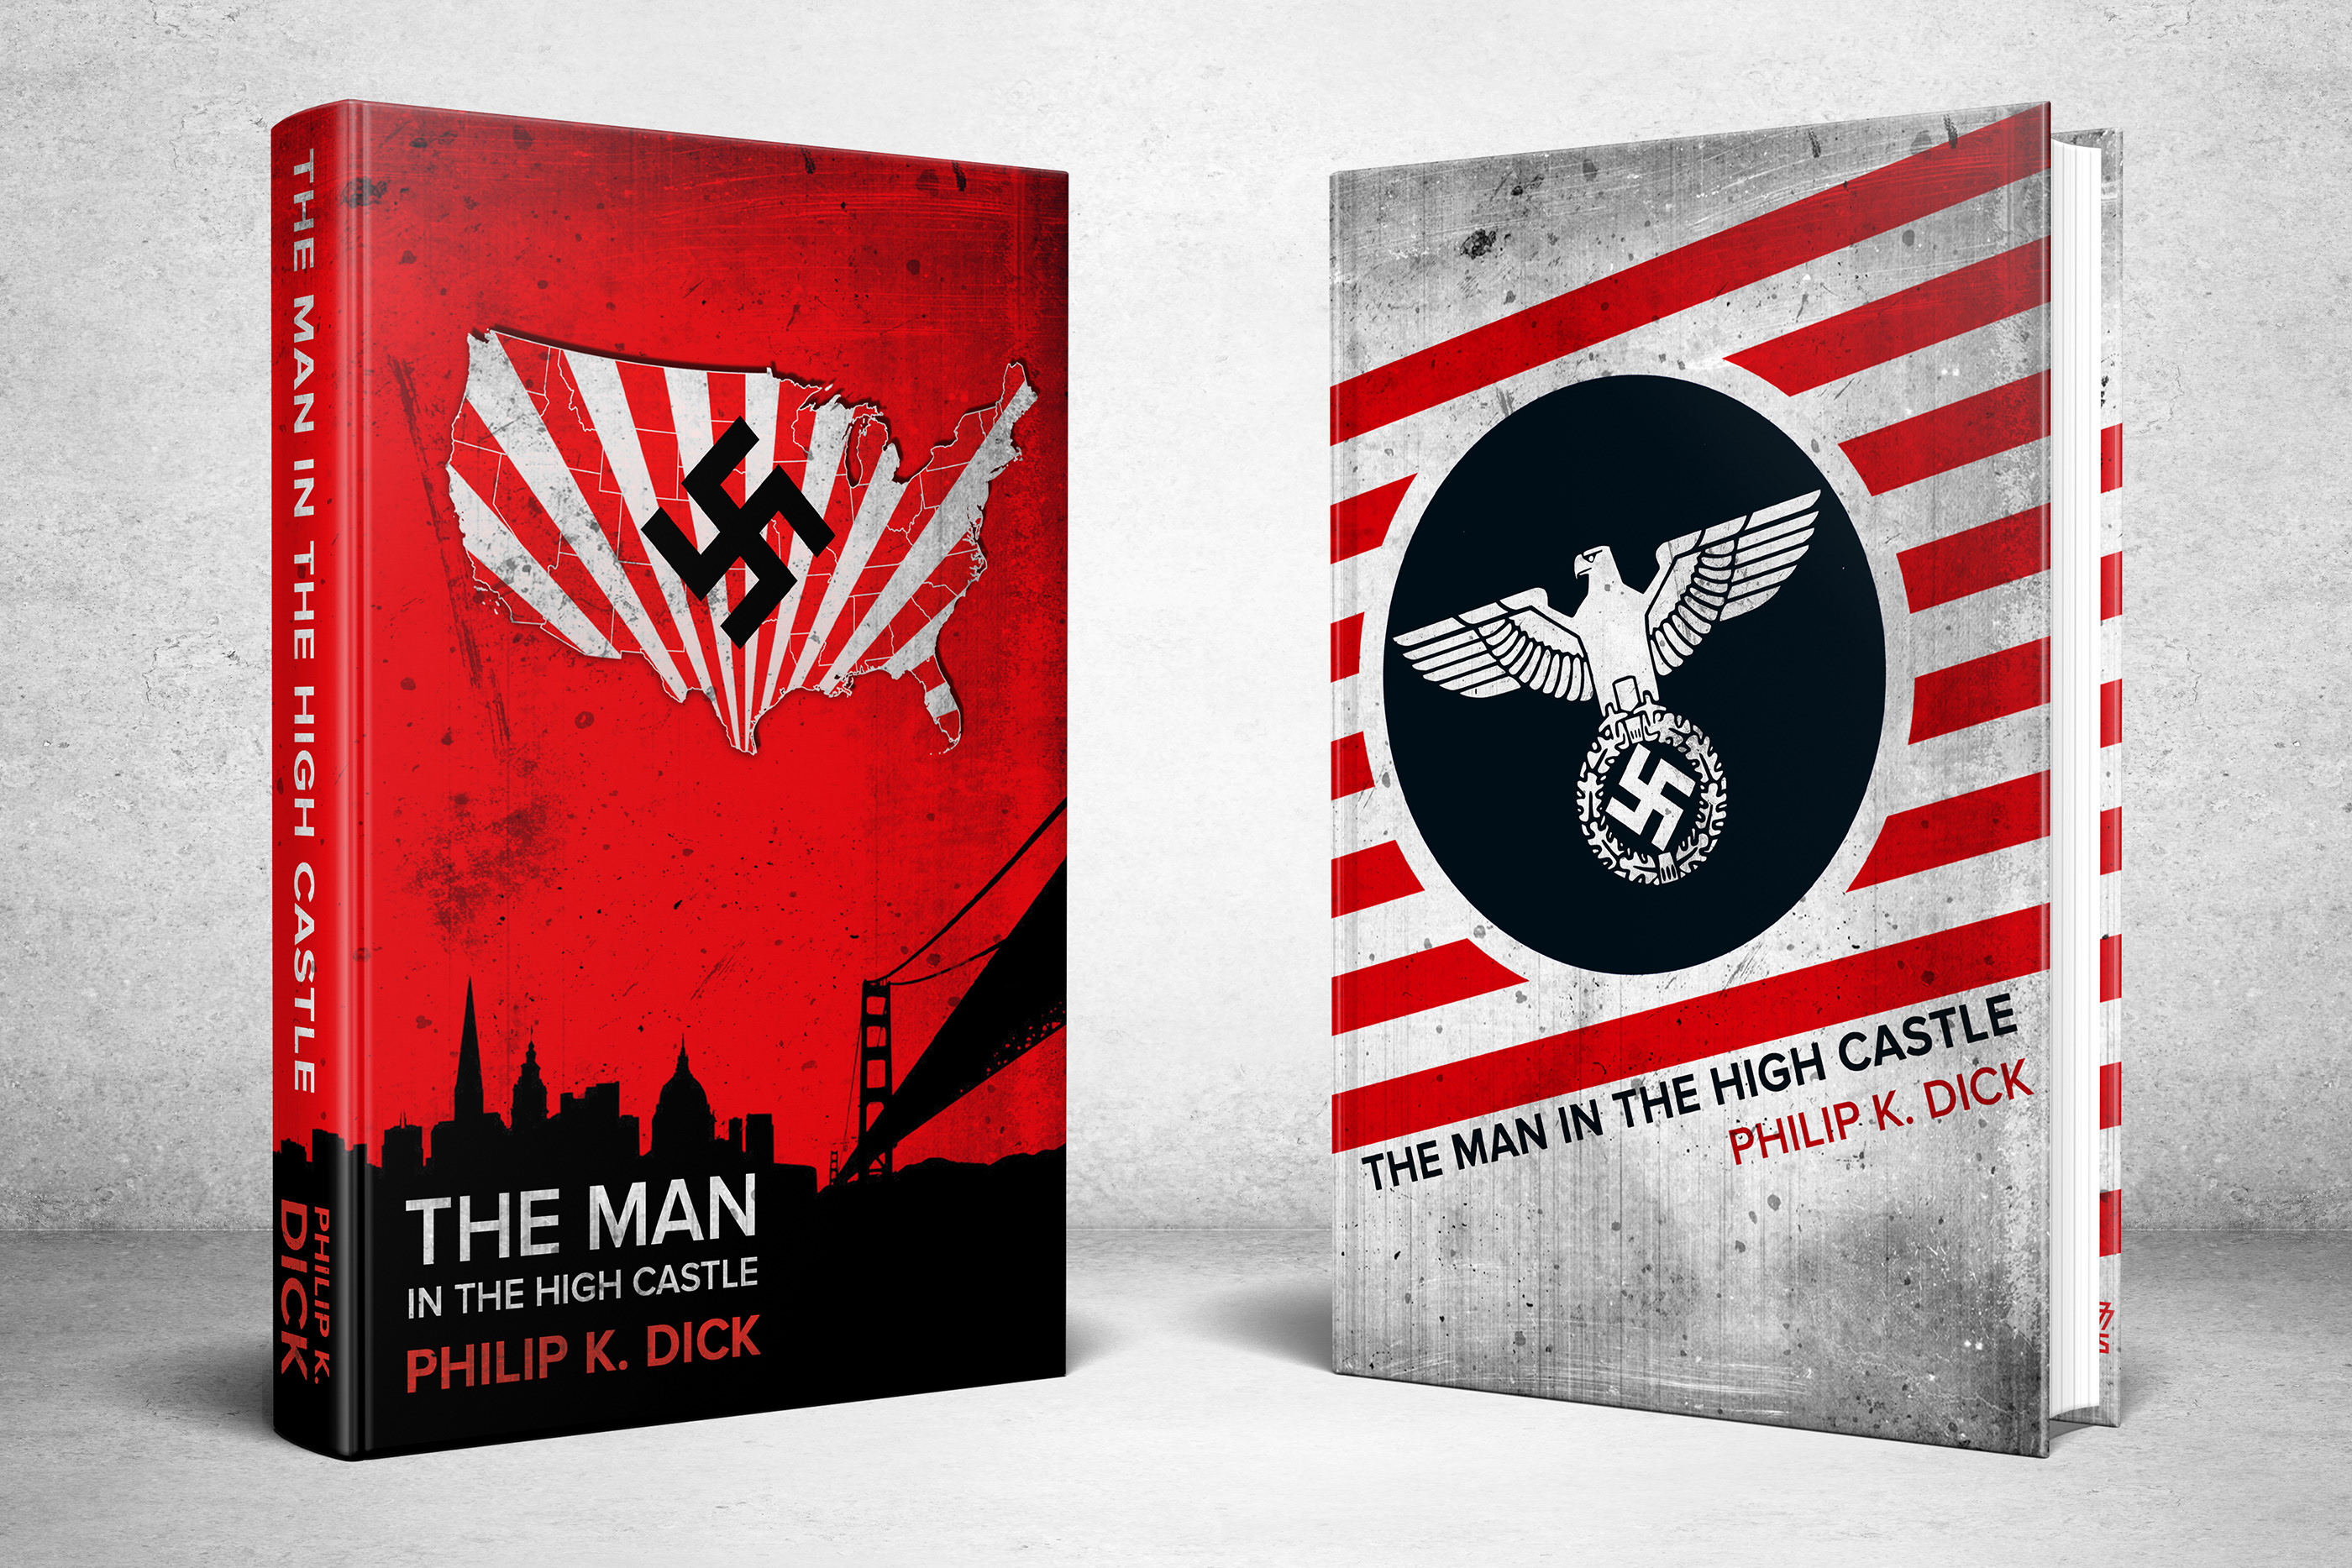 Philip K. Dick: &quot;The Man in the High Castle&quot; book cover on Behance